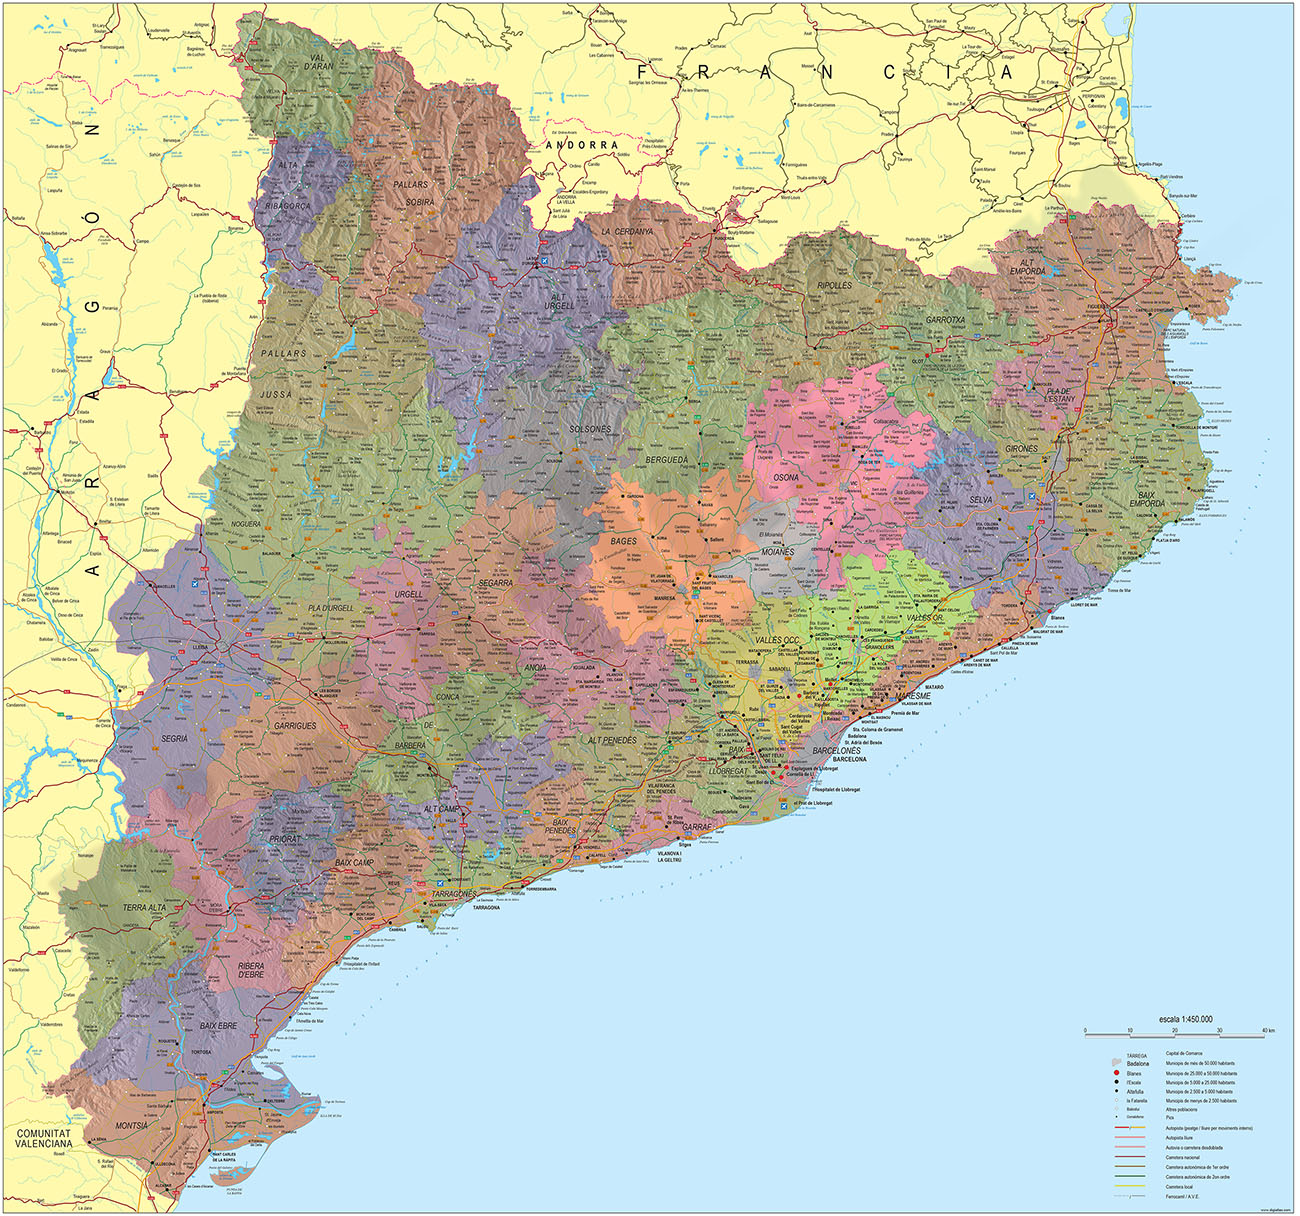  Catalonia Physical-political poster map